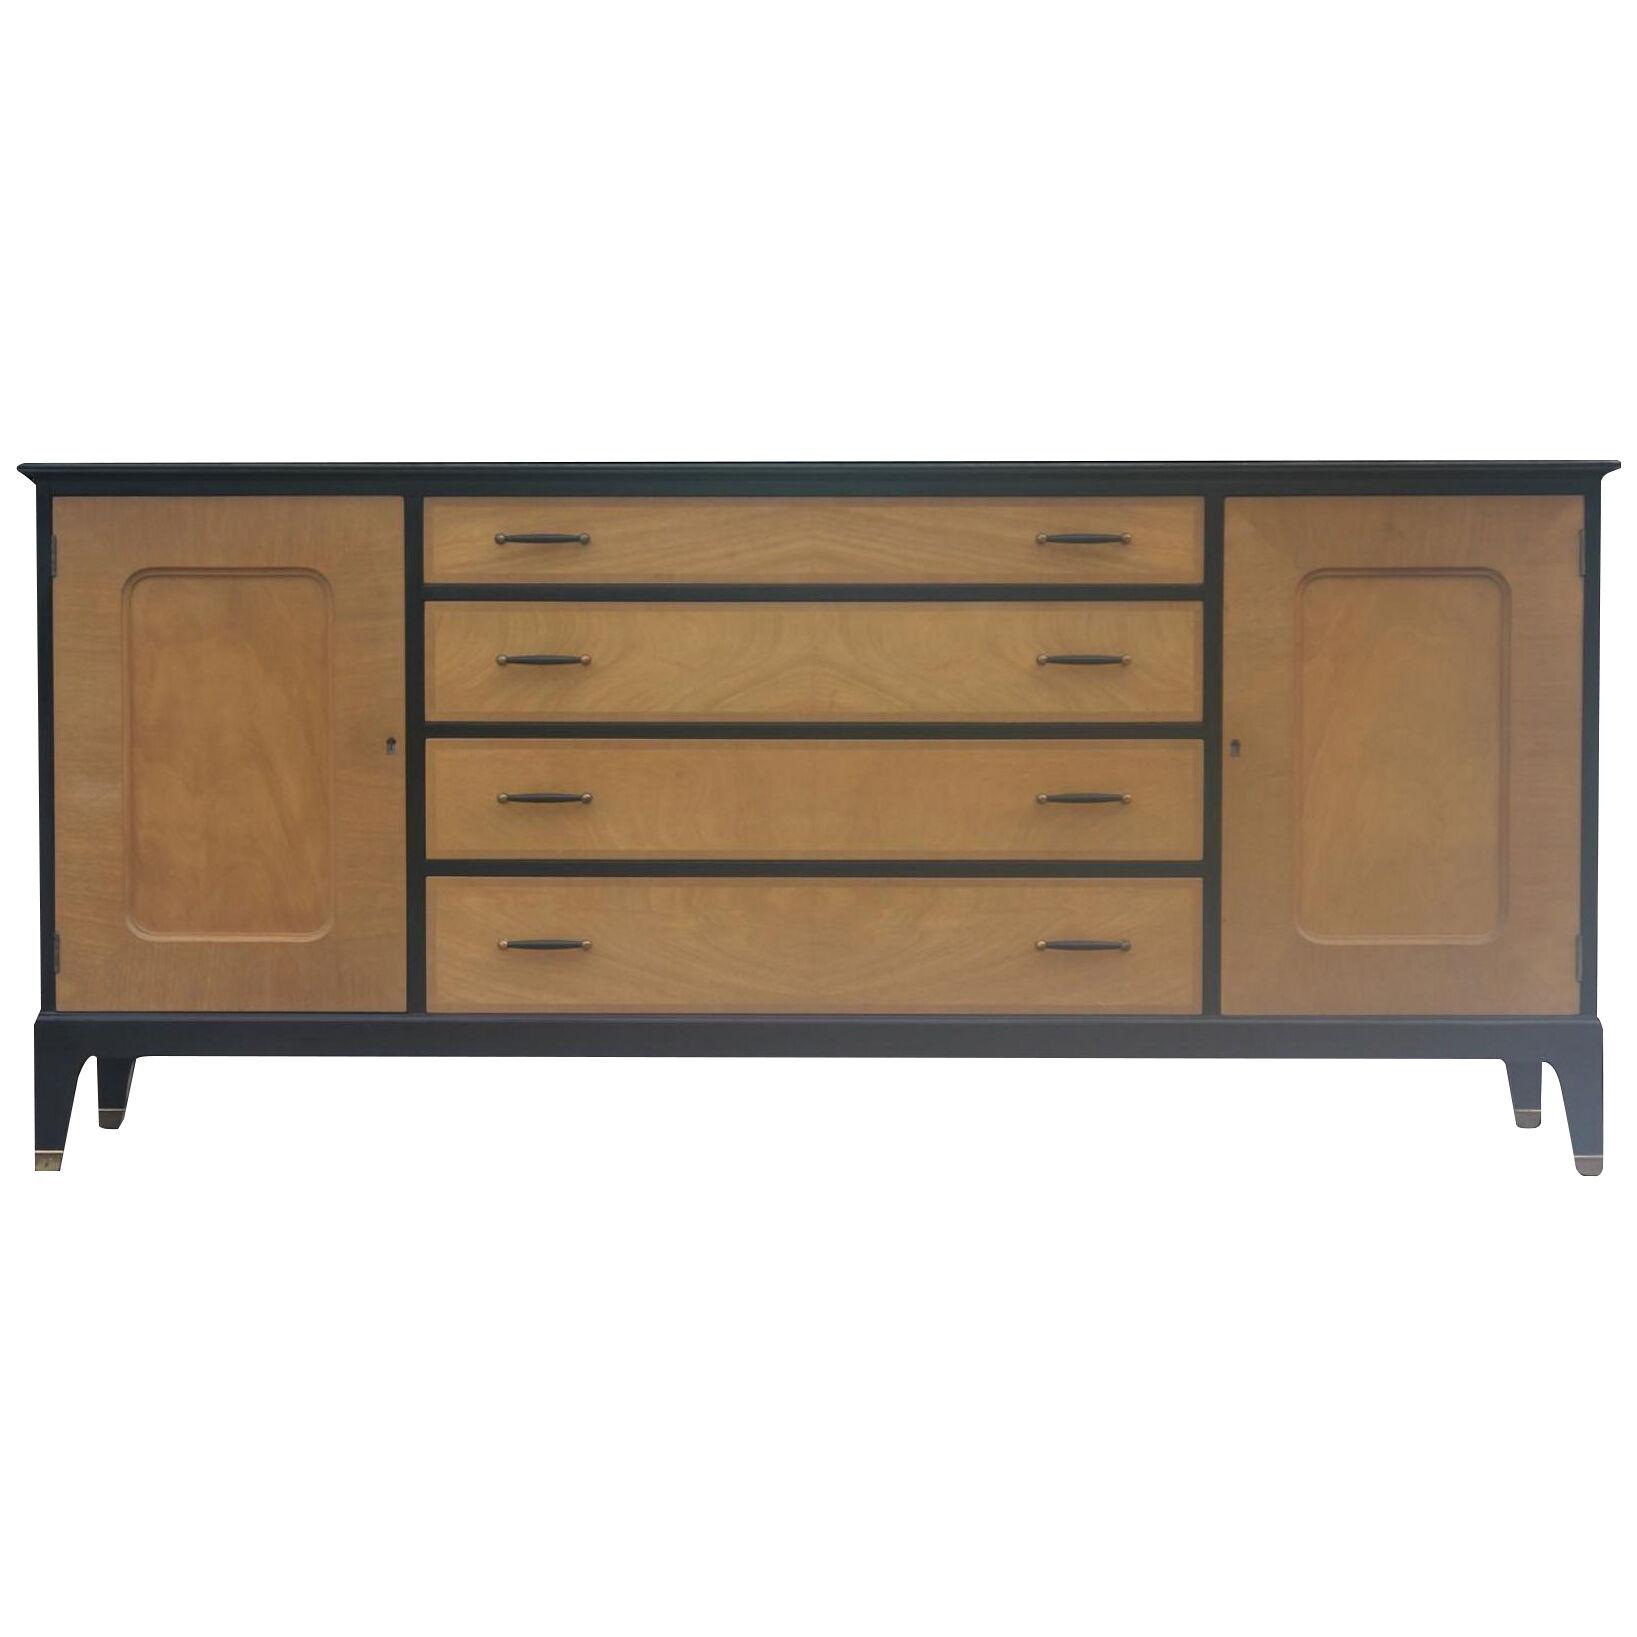 Modern Two-Tone Four-Drawer Credenza or Sideboard by Johnson Furniture